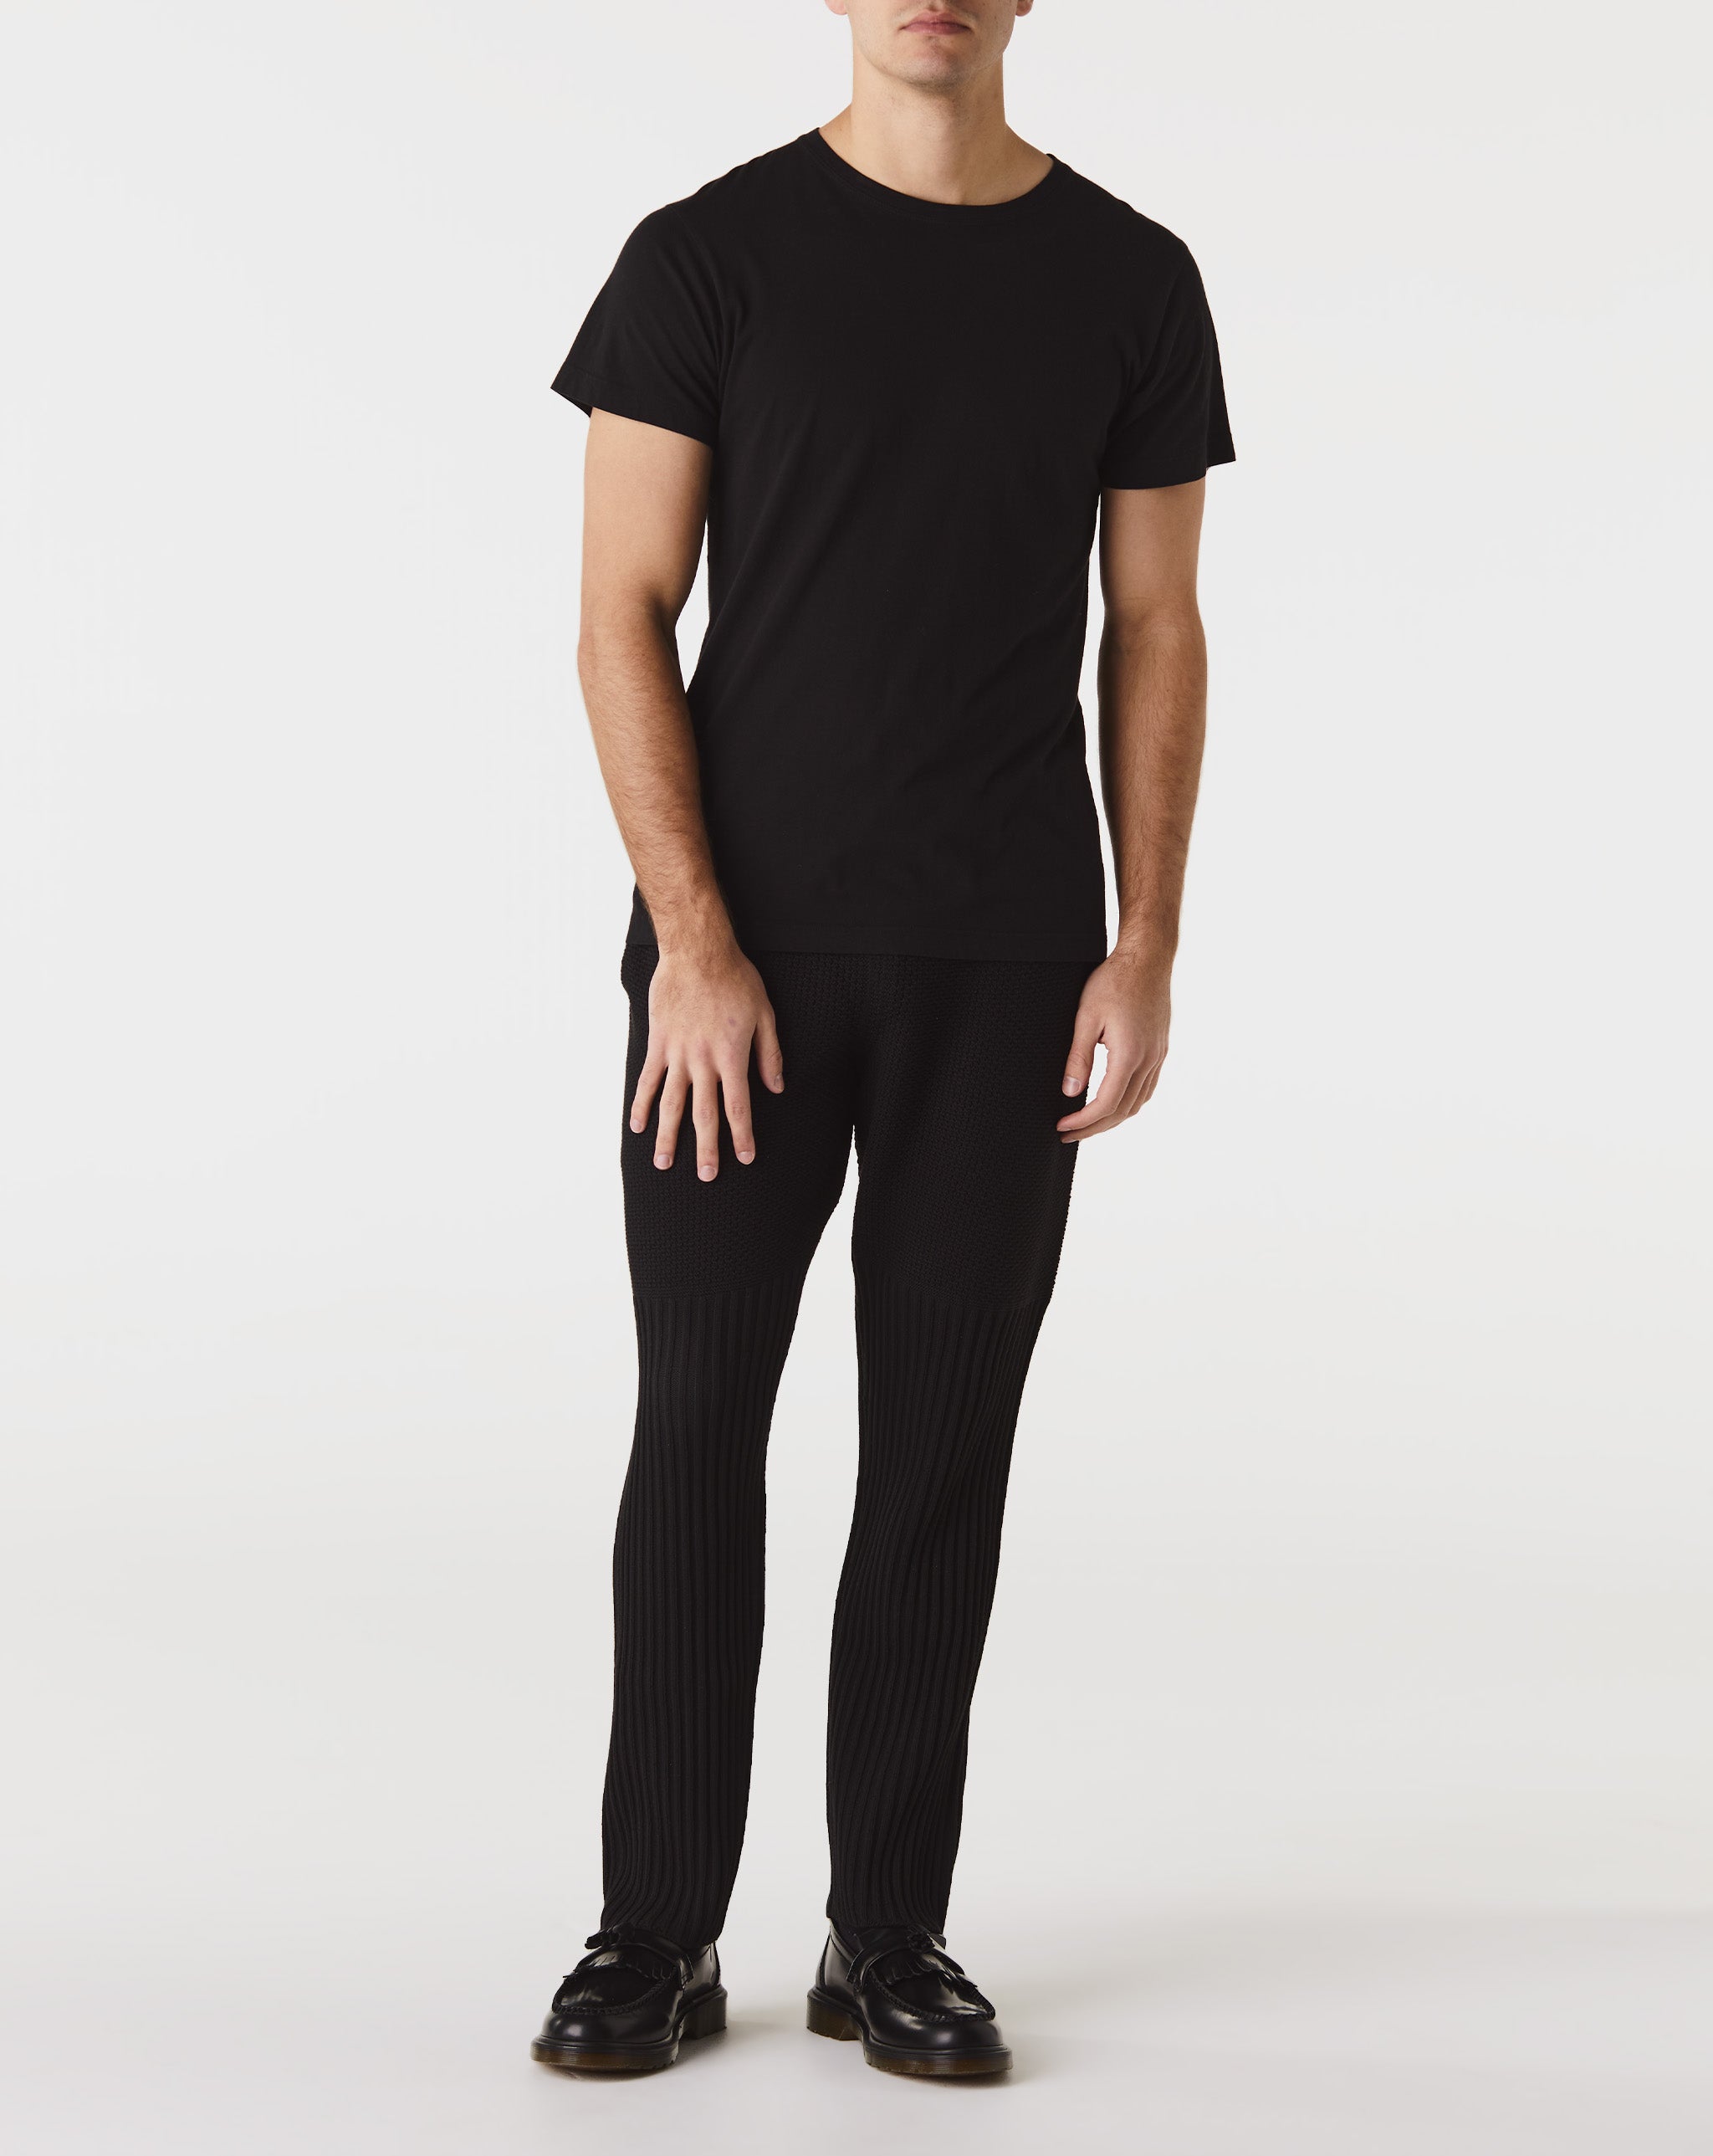 adidas Performance running shorts Y Project draped cotton T-shirt dress  - Cheap Cerbe Jordan outlet